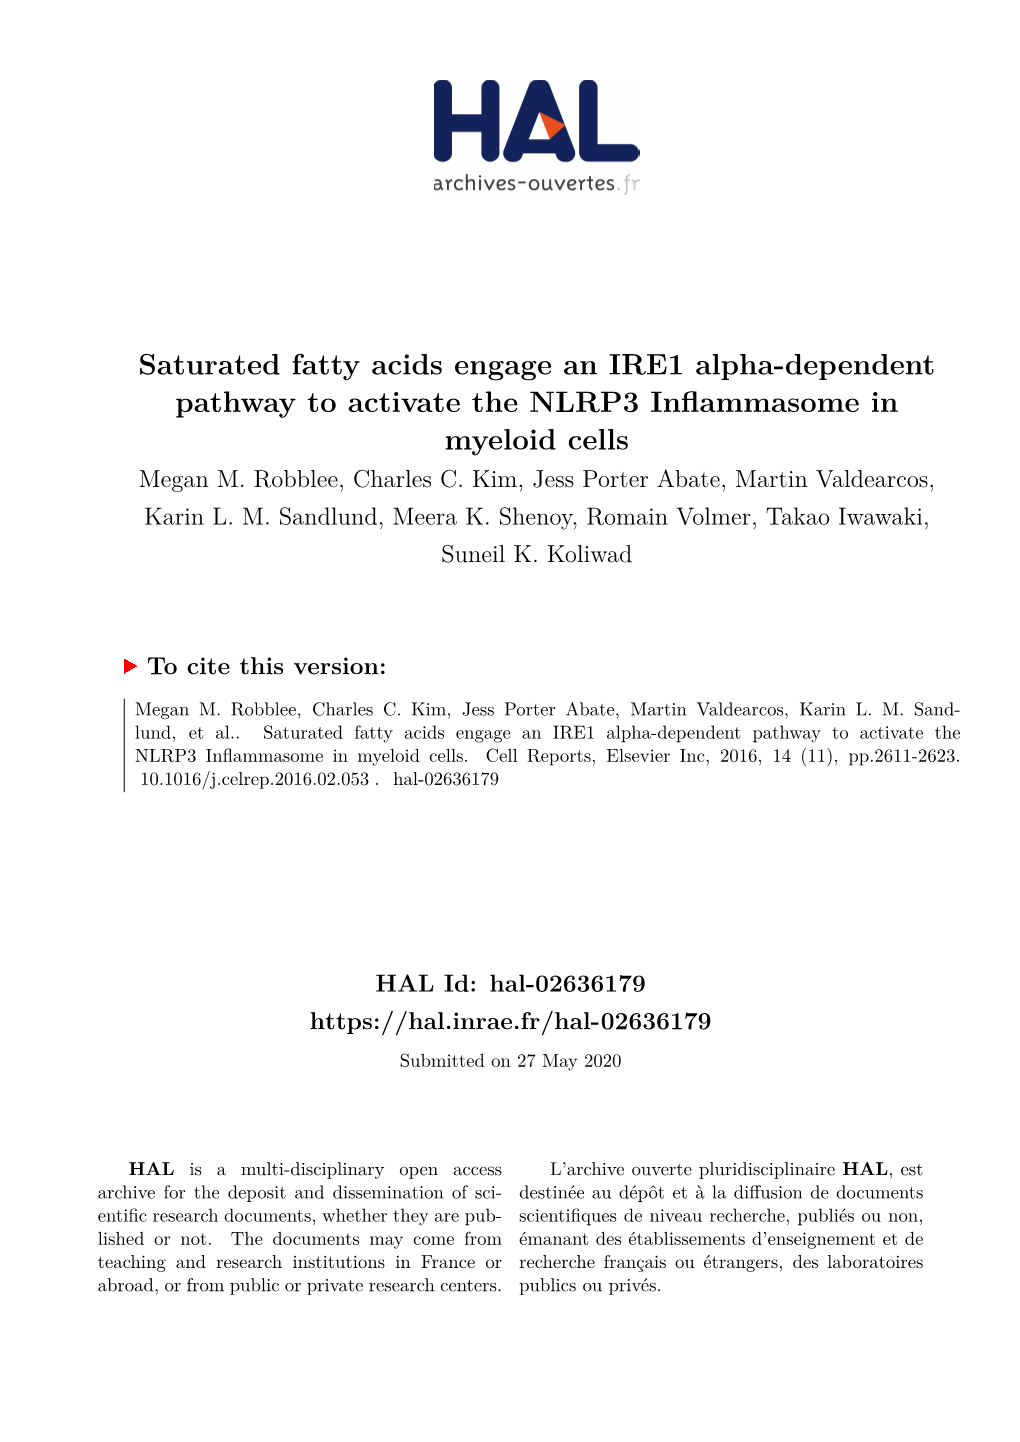 Saturated Fatty Acids Engage an IRE1 Alpha-Dependent Pathway to Activate the NLRP3 Inflammasome in Myeloid Cells Megan M